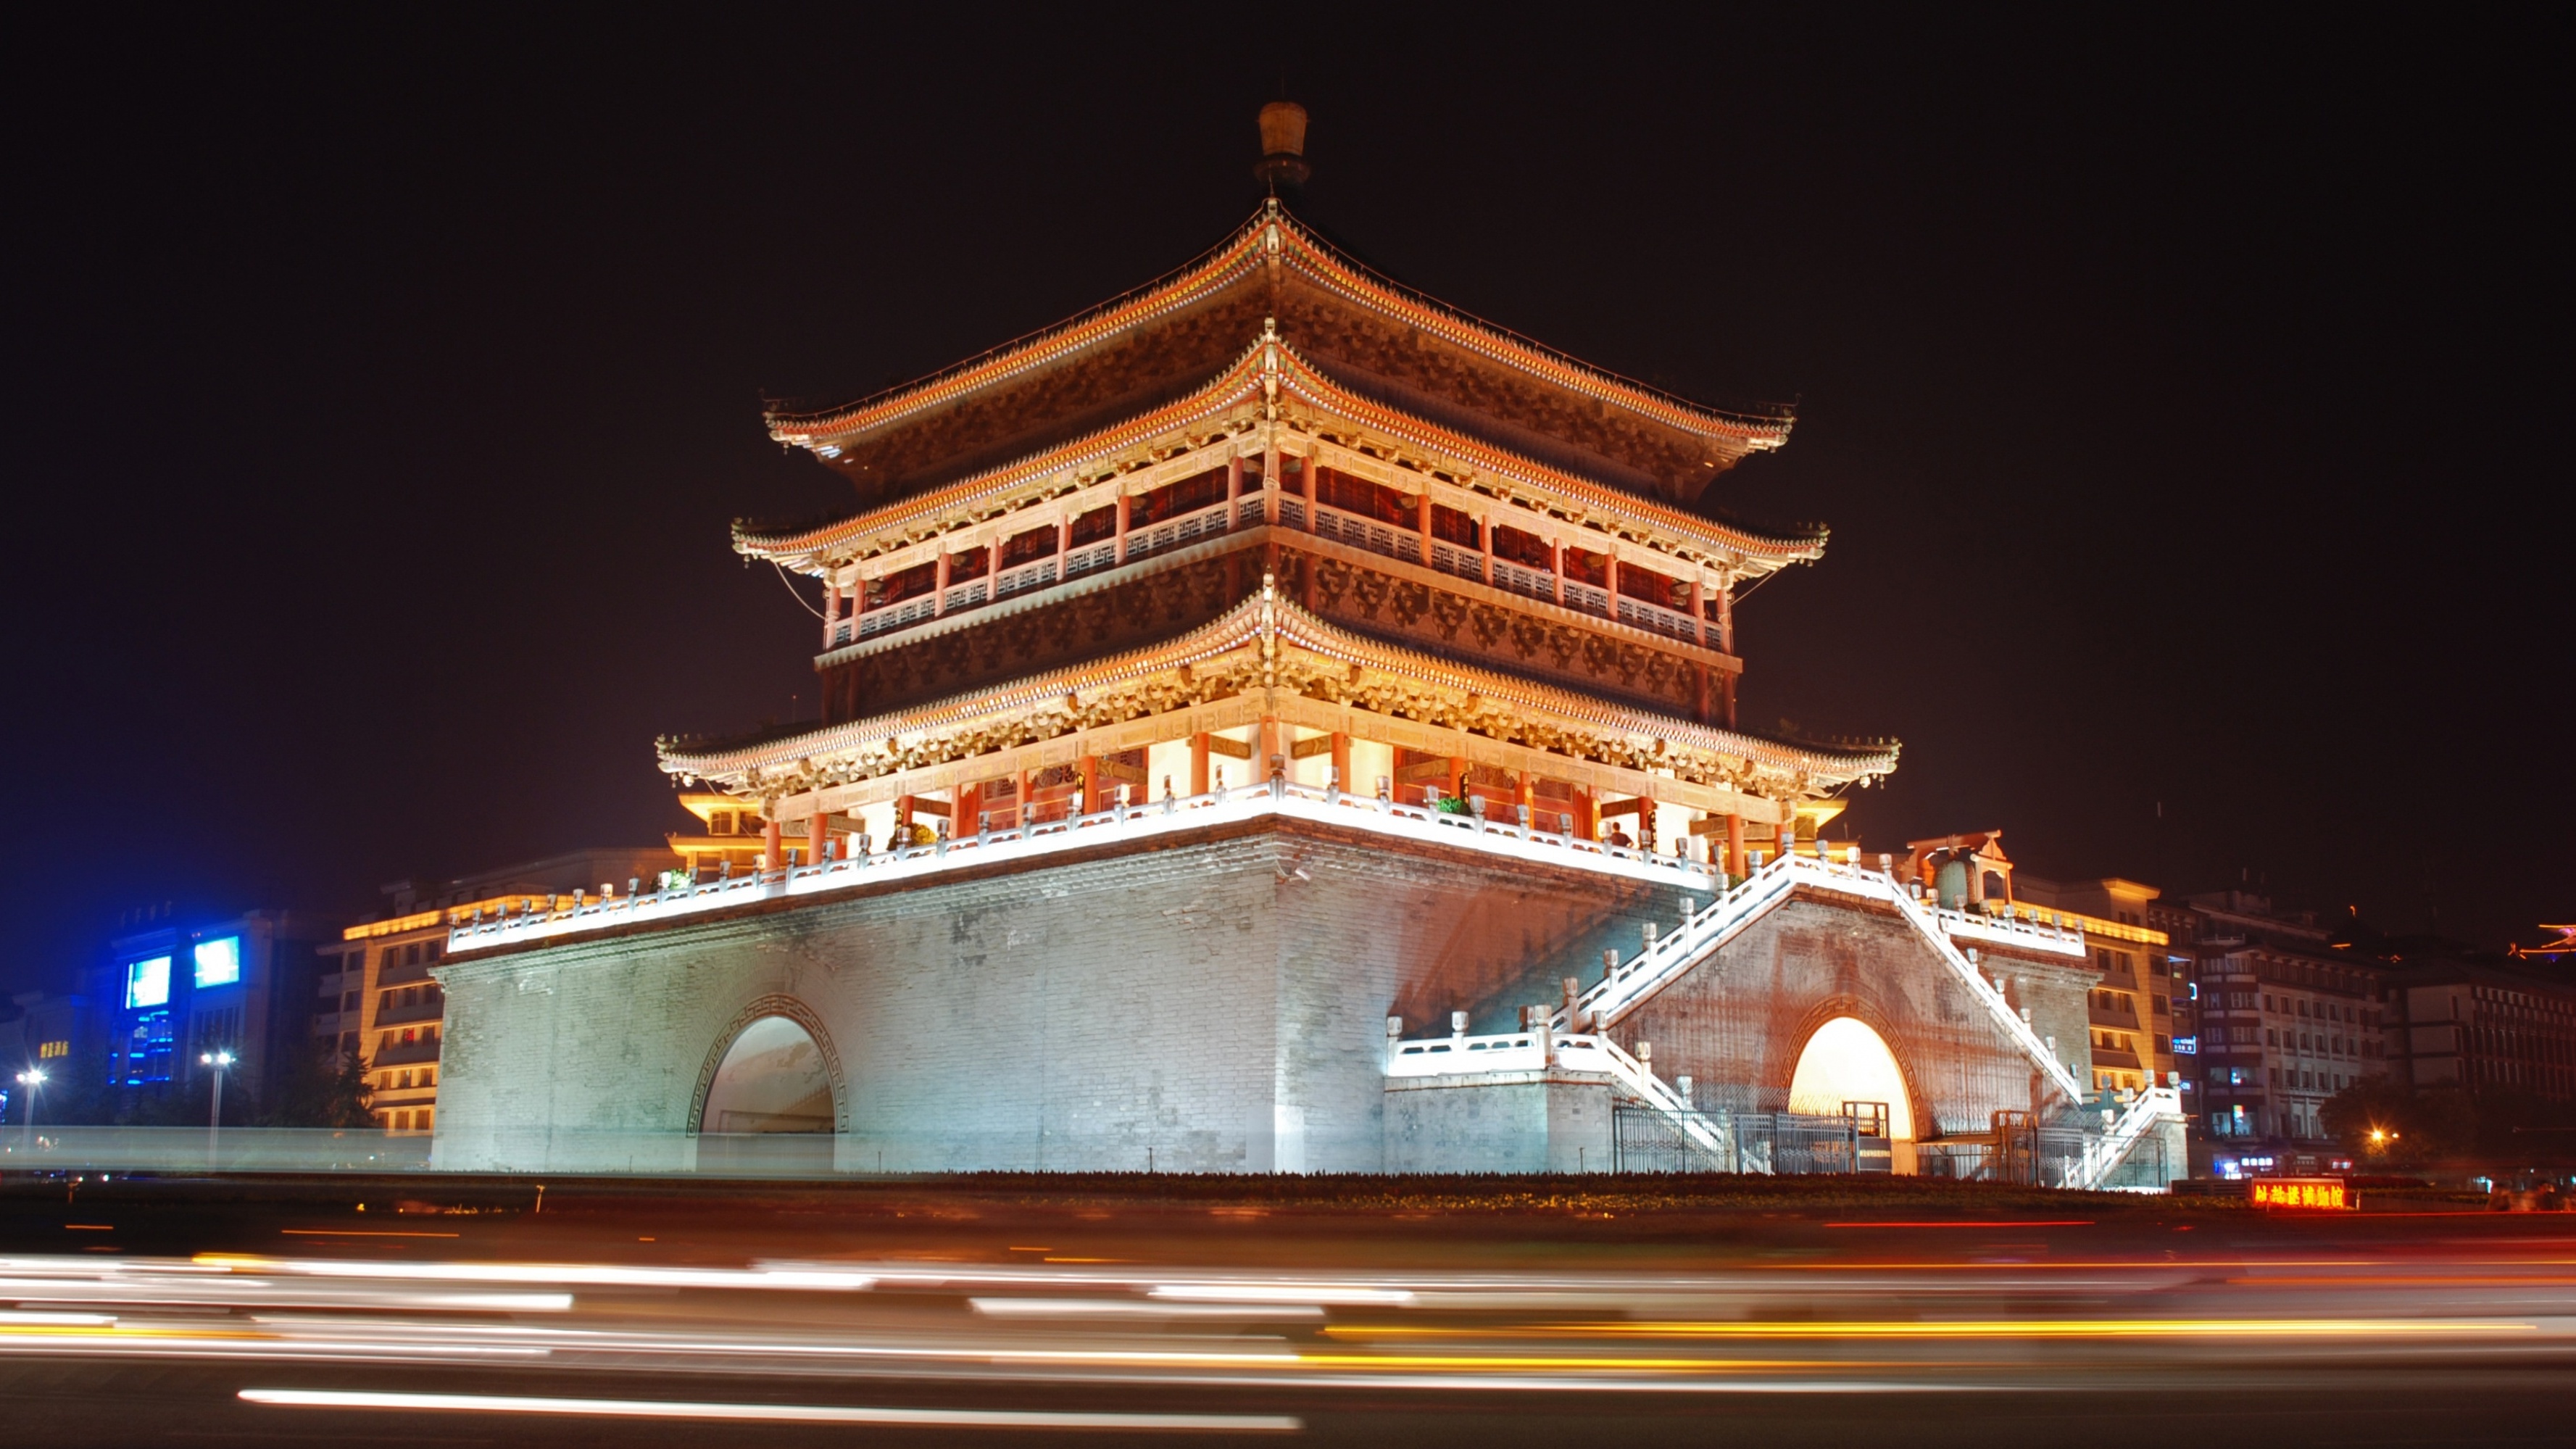 Man Made Bell Tower of Xi'an HD Wallpaper | Background Image